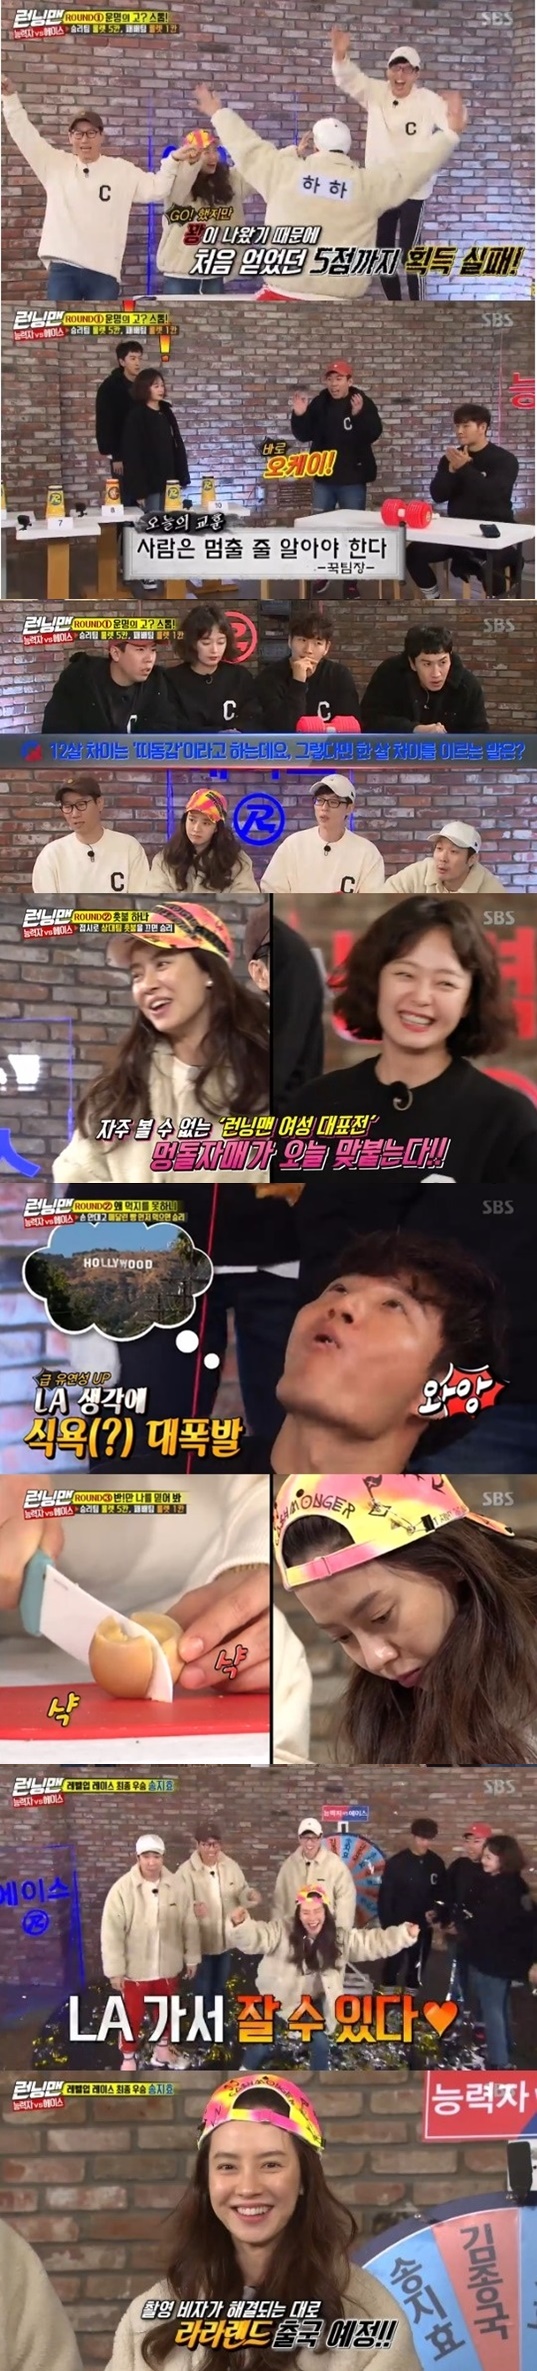 Running Man ratings rise verticallyAccording to Nielsen Korea, a ratings agency on the 11th, the SBS entertainment program Running Man, which was broadcast on the 10th, recorded an average audience rating of 5.9% and the second part recorded 8.1% (based on the audience rating of households in the Seoul metropolitan area).The second part rose 2.2 percent from last week.The highest audience rating per minute rose to 9.8%, which is close to 10%, and the 2049 target audience rating, which is an important indicator of major advertising officials, ranked first in the same time zone with 5.4% (based on two-part ratings).On this day, the first project of the new year, Race Level Up Race winner Ace Song Ji-hyo and Ability Kim Jong-kook were confronted.The winner was able to pick one of the team members and get the luck of going on a trip to LA together, while Song Ji-hyo and Kim Jong-kook announced their respective LA travel plans.As ace team, Song Ji-hyo, Yoo Jae-Suk, Ji Suk-jin, Haha, and the talented team consisted of Kim Jong-kook, Lee Kwang-soo, Yang Se-chan and Jeon So-min.The three-round showdown was a roulette-kan set up following round-by-round victories, and each team was tense with a fierce confrontation. Round 1 Go of Destiny? Stop!, Yoo Jae-Suk and Lee Kwang-soos Kangson Parade followed, but the ace team won in the performance of Song Ji-hyo.The second round was a game victory for the Ace team, but the Ace team did not overturn the Ace teams dominance, and the third round also took the Ace team victory.Song Ji-hyo, who took more roulette Khan, turned roulette into a final showdown with Kim Jong-kook, and Roulette stopped in Song Ji-hyos name.The scene jumped to 9.8% of the highest audience rating per minute, taking the best one minute.